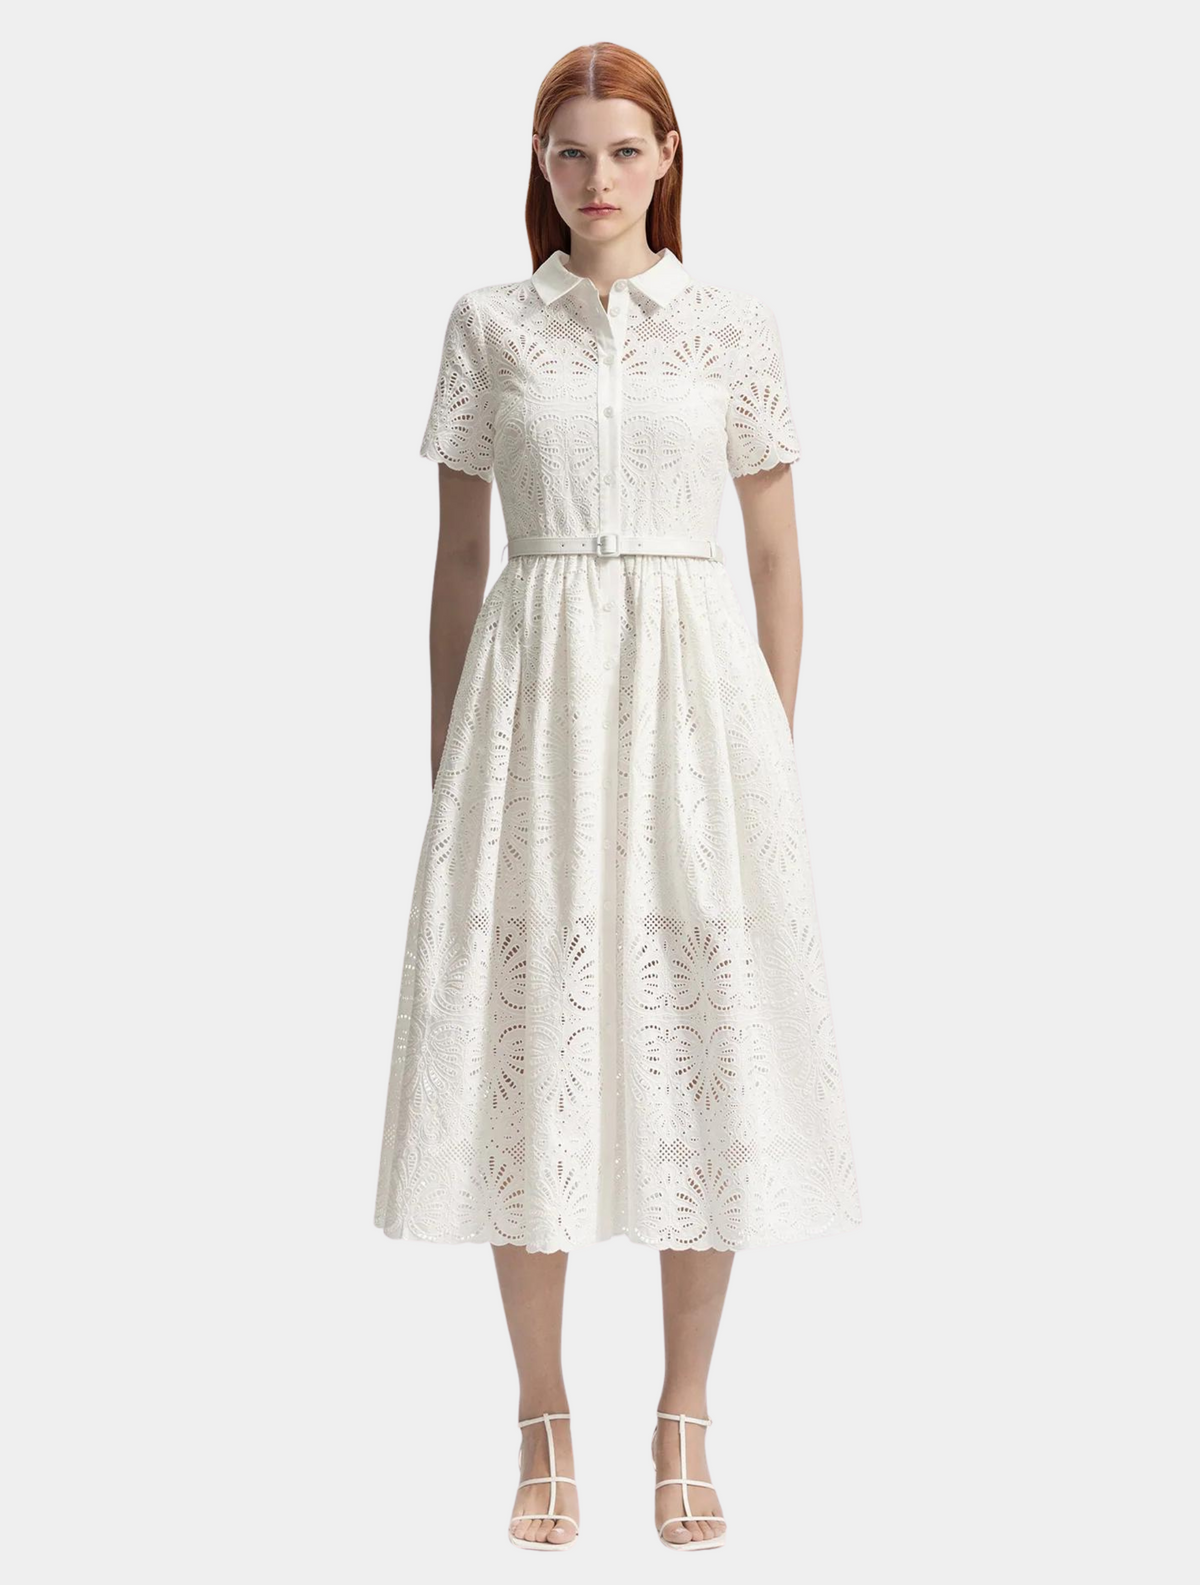 White brodie anglais midi shirt dress with collar short sleeves and fabric belt